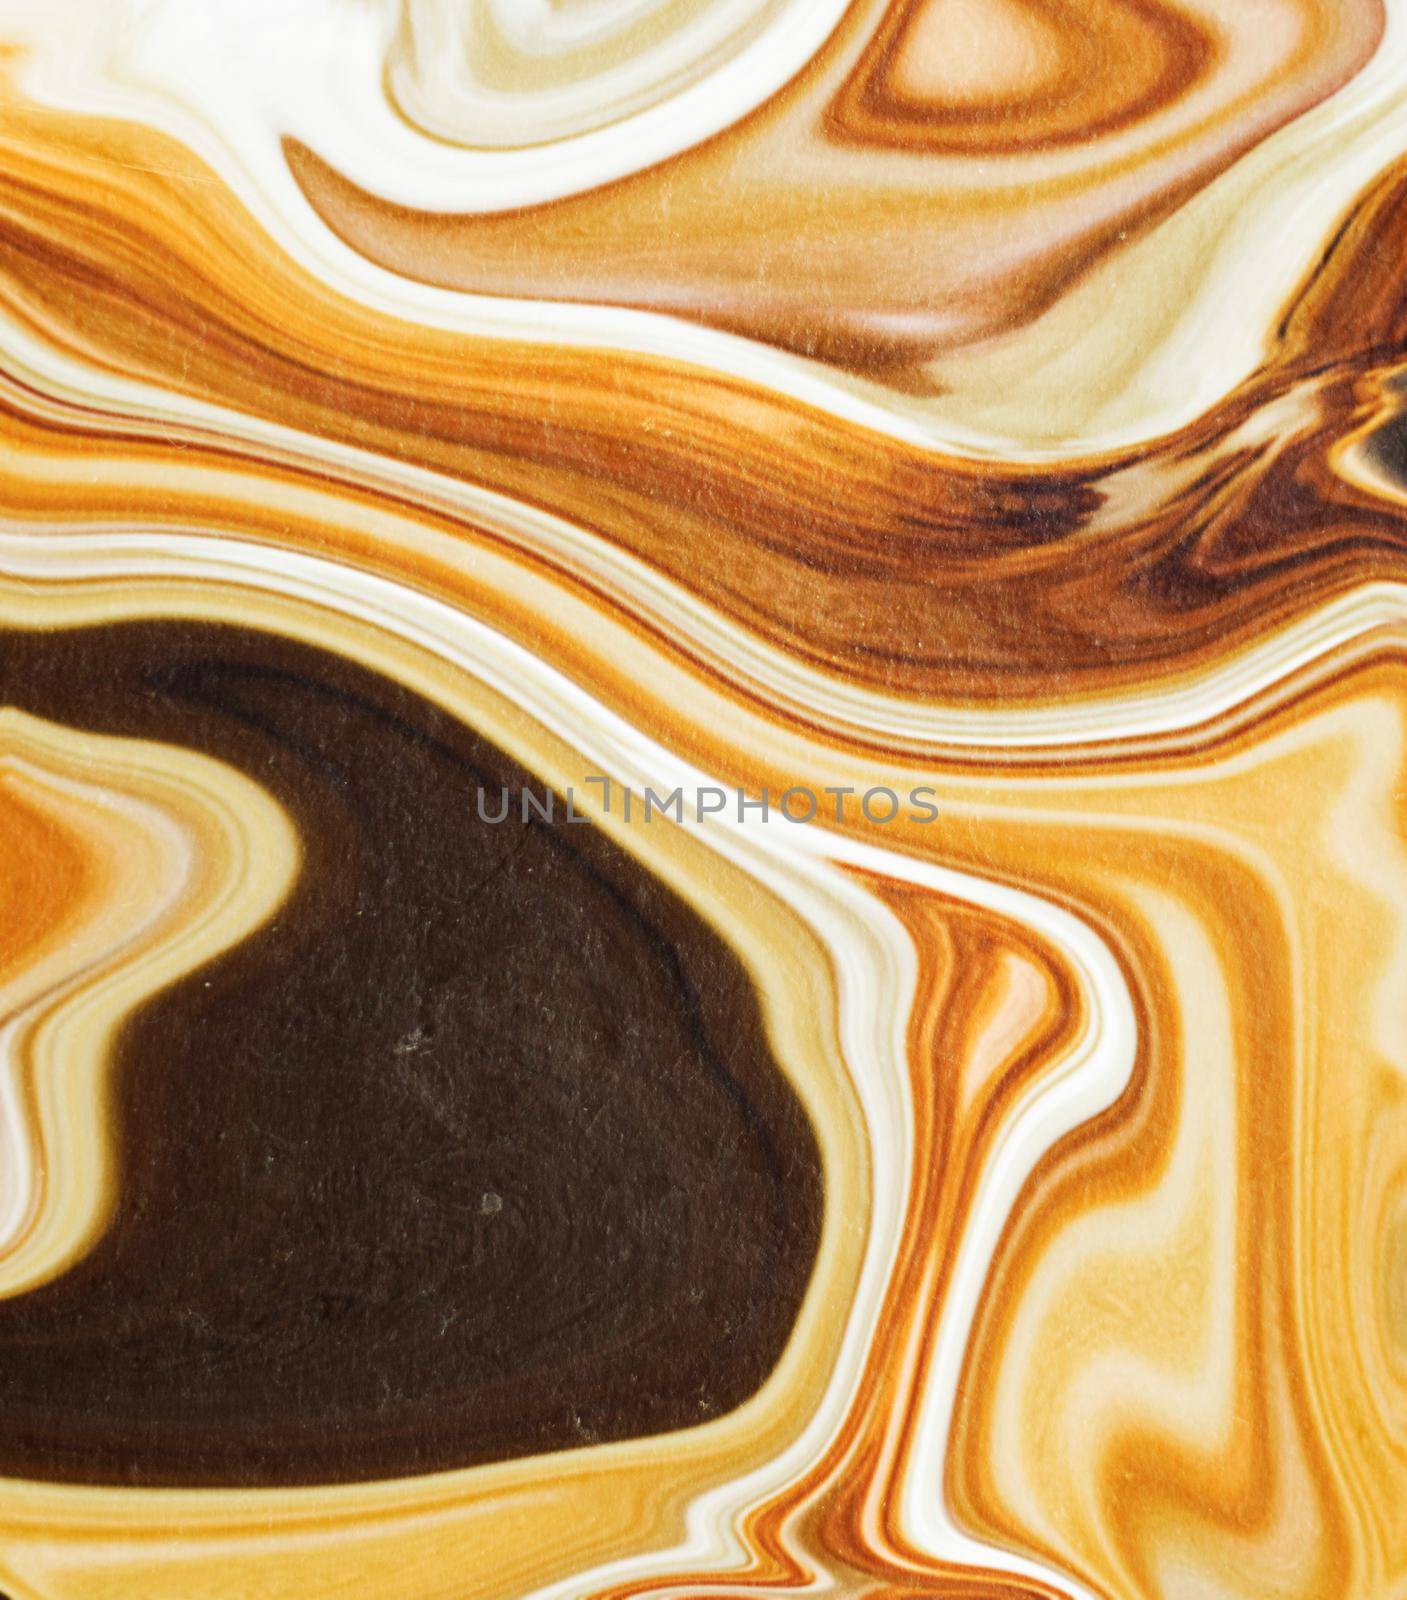 Modern marble stone surface for decoration, flatlay - luxurious background, abstract textures and stylish design concept. The art of luxury and chic